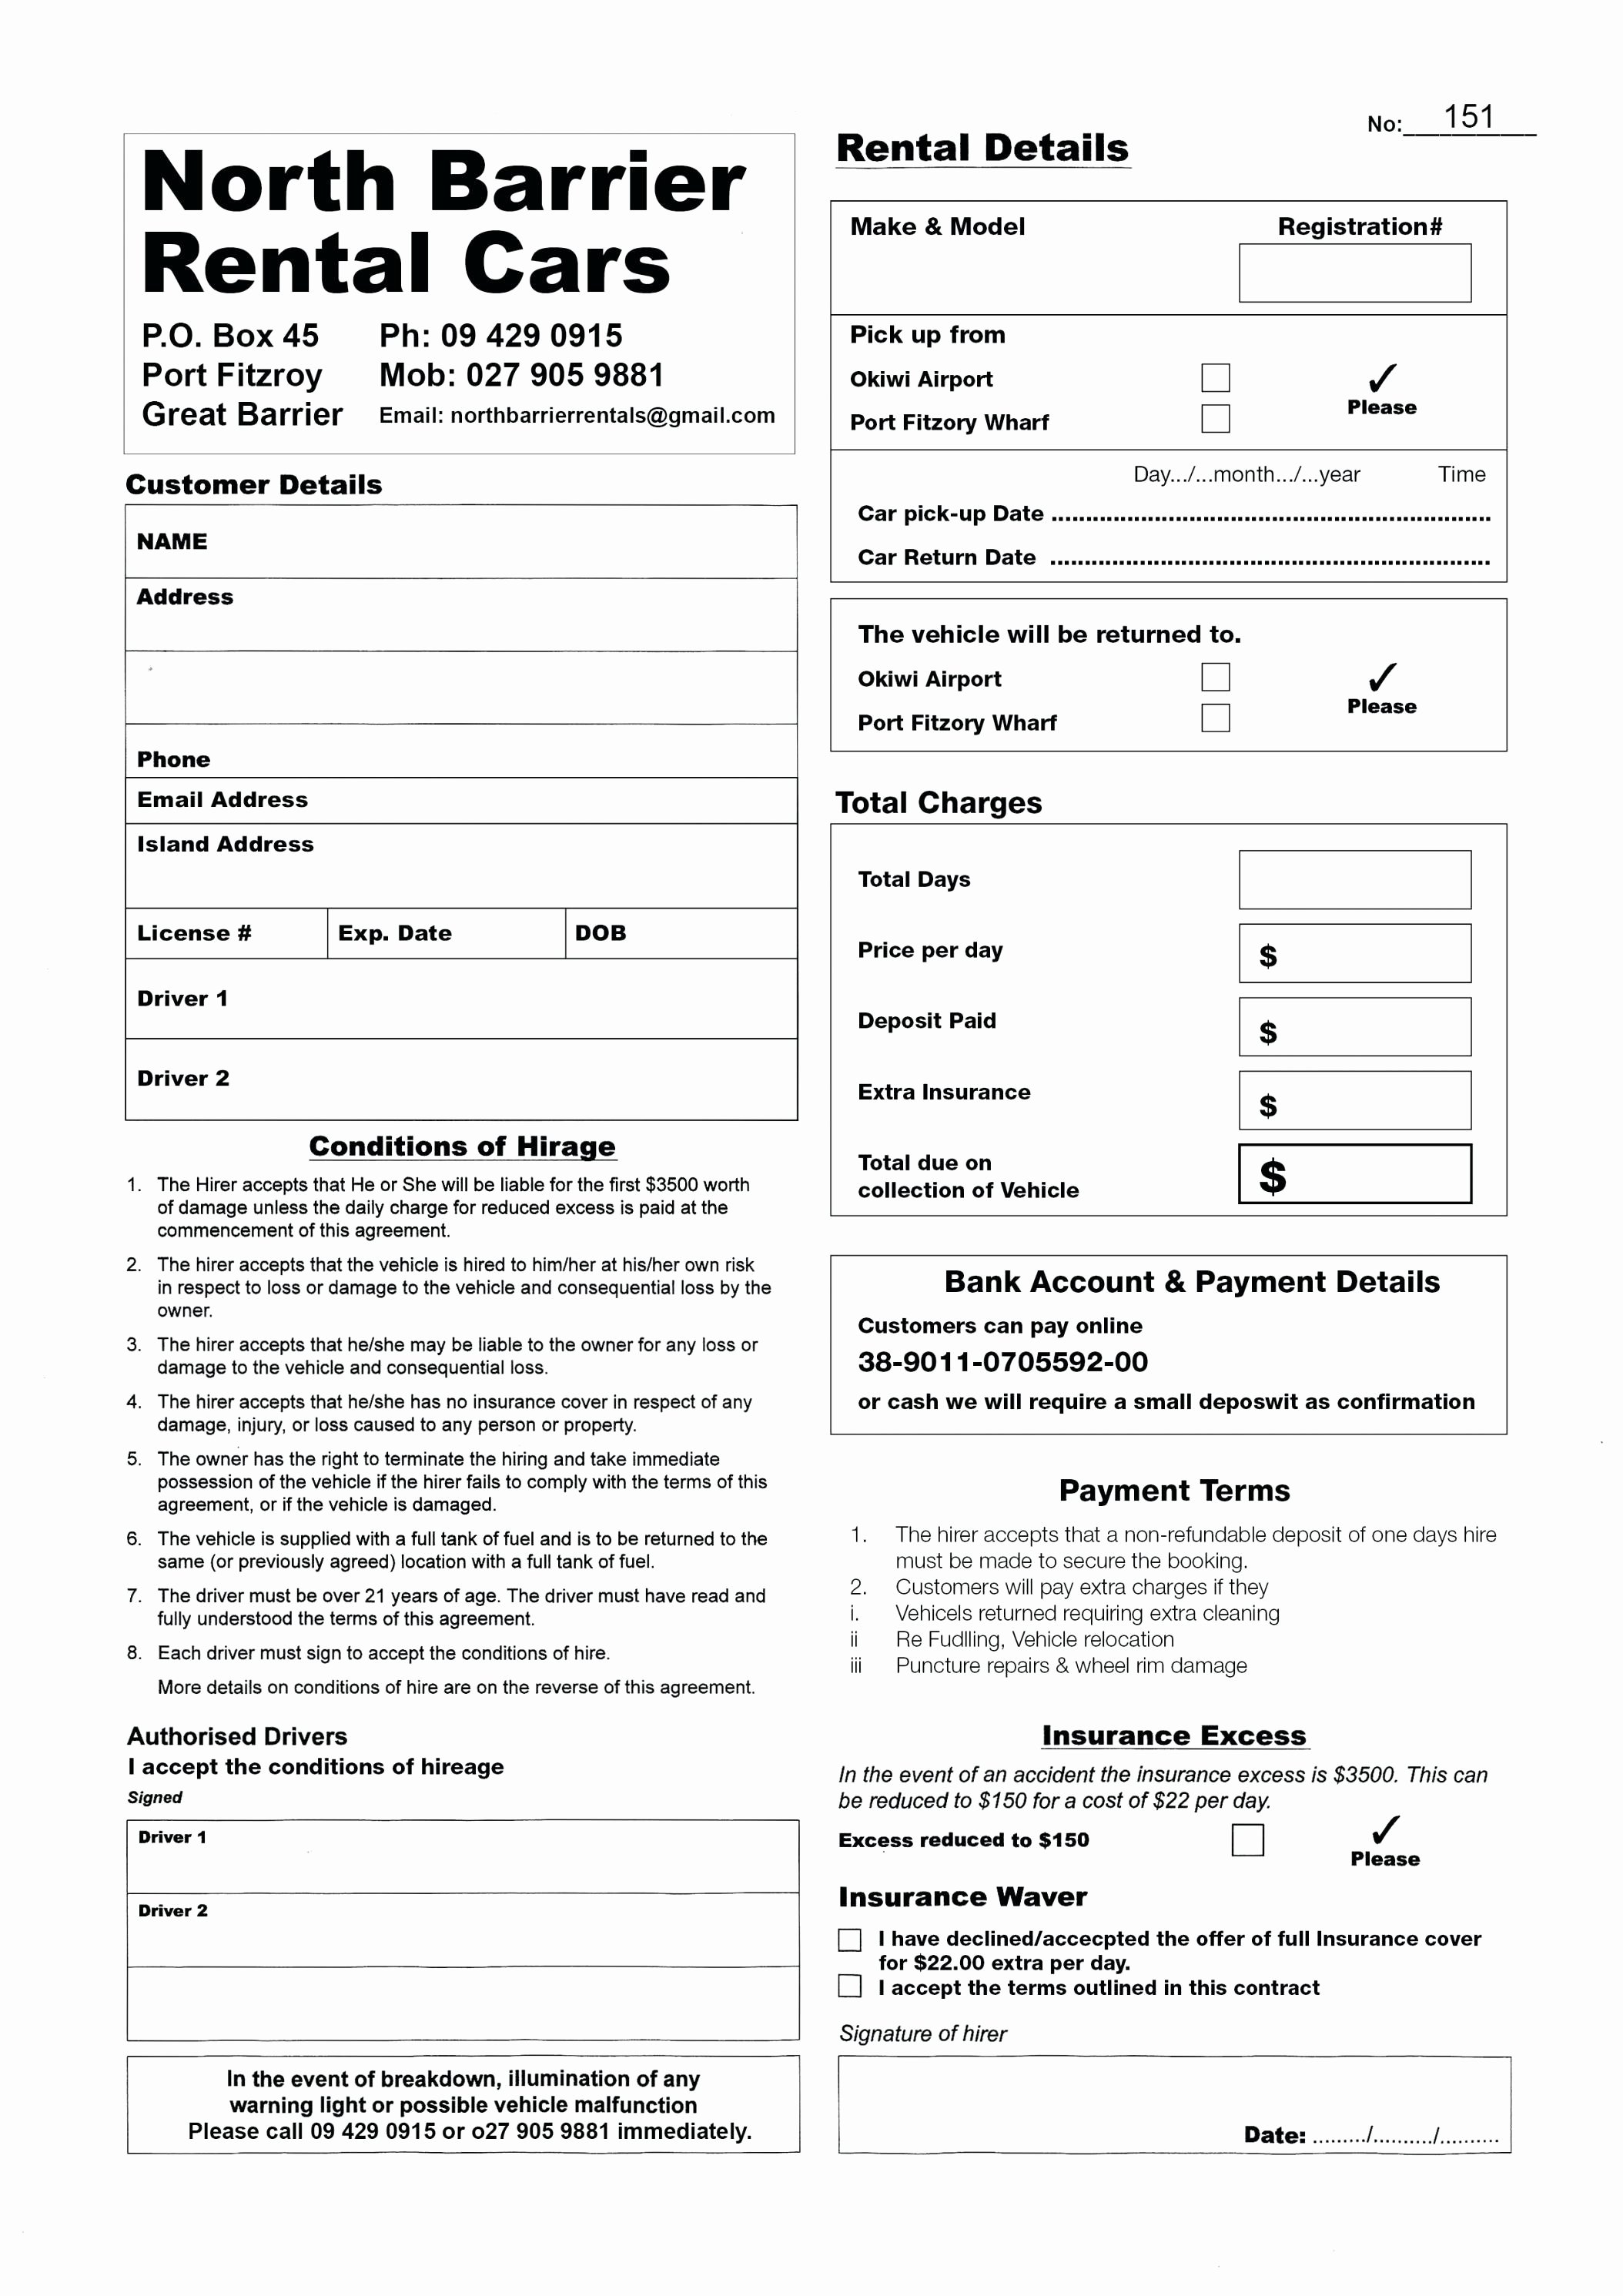 Bounce House Rental Agreement Template Unique Rental forms Rental Agreement A Birthday Party Train form